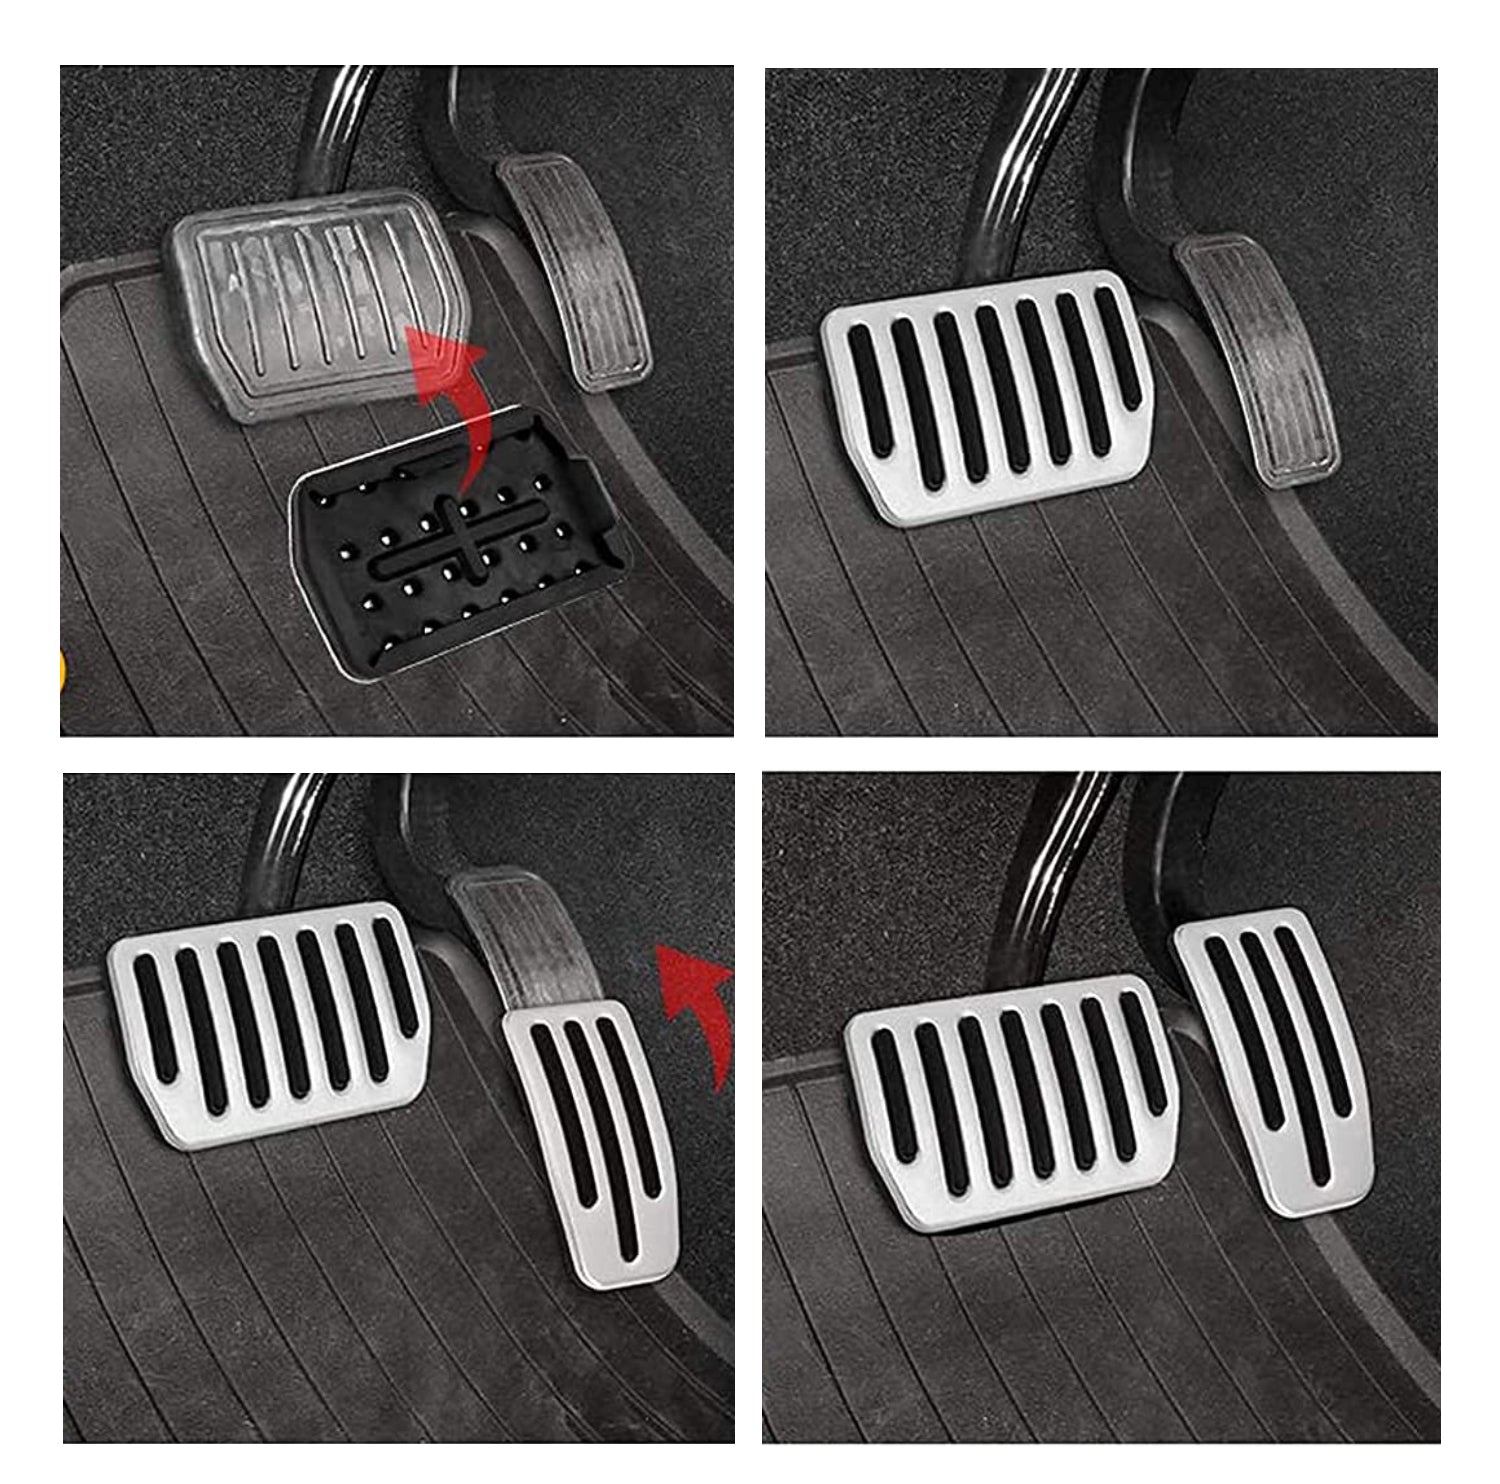 Aluminum Alloy Foot Pedal Cover Set For Model X and Model S